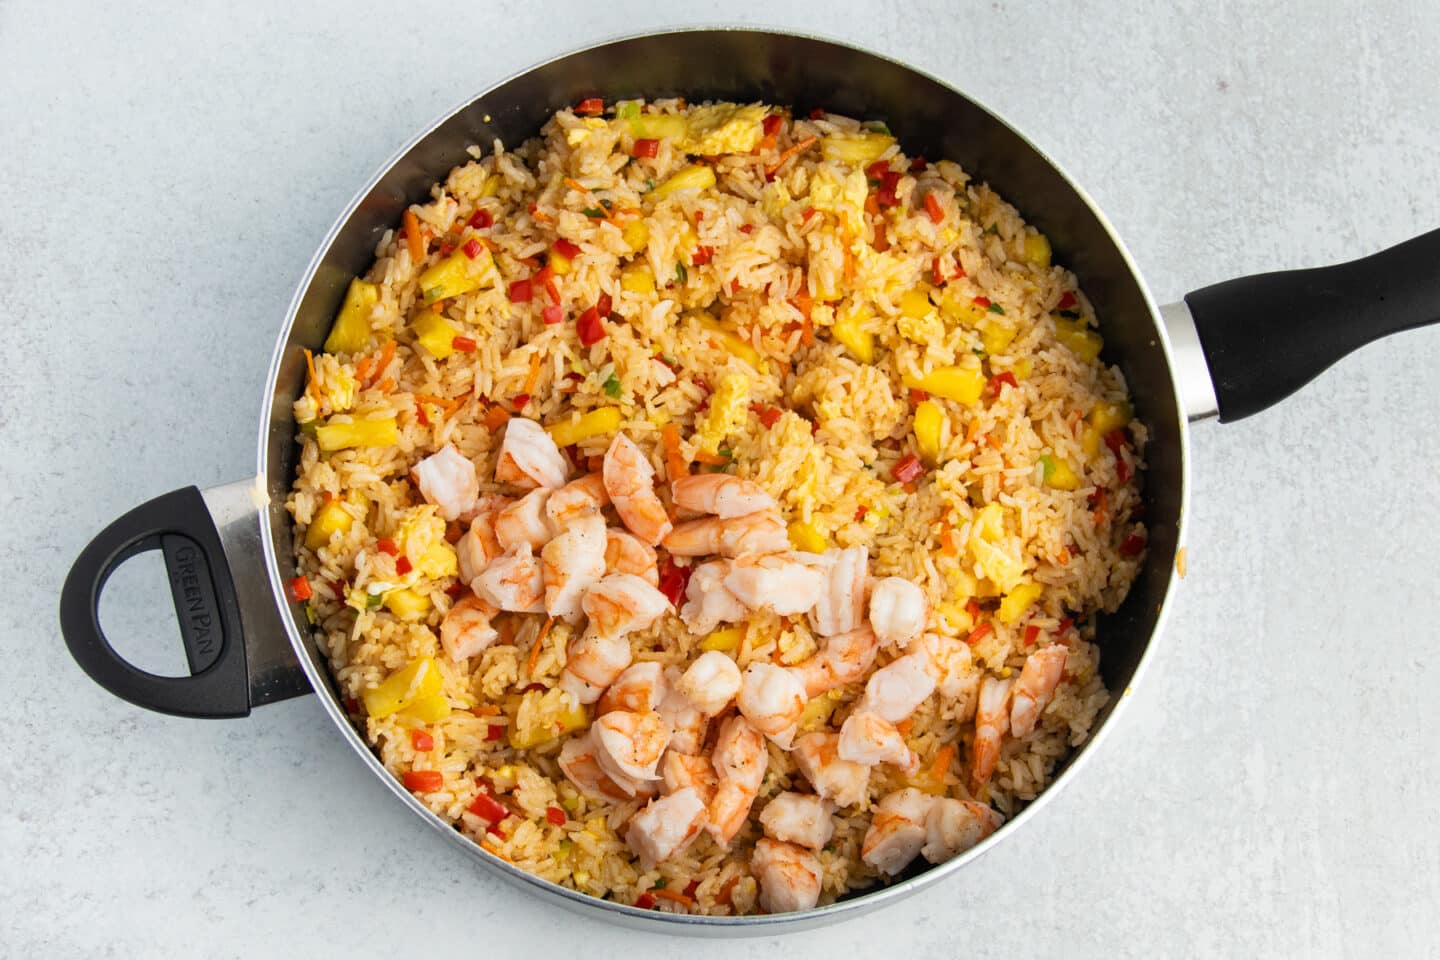 Picture of skillet with fried rice with shrimp added back in.